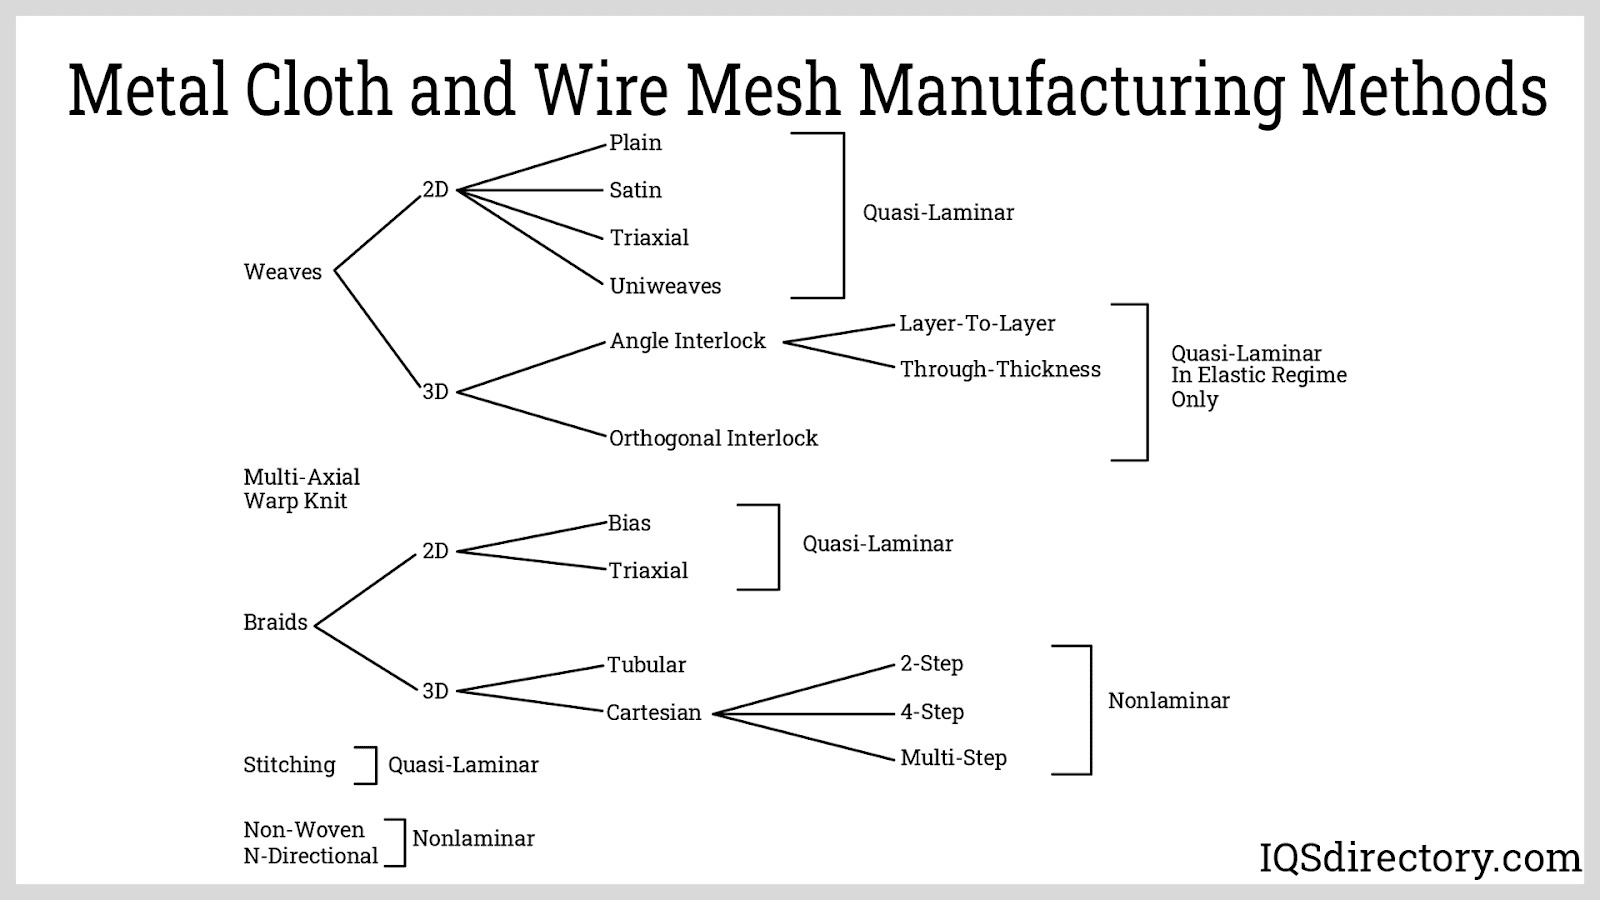 Metal Cloth and Wire Mesh Manufacturing Methods